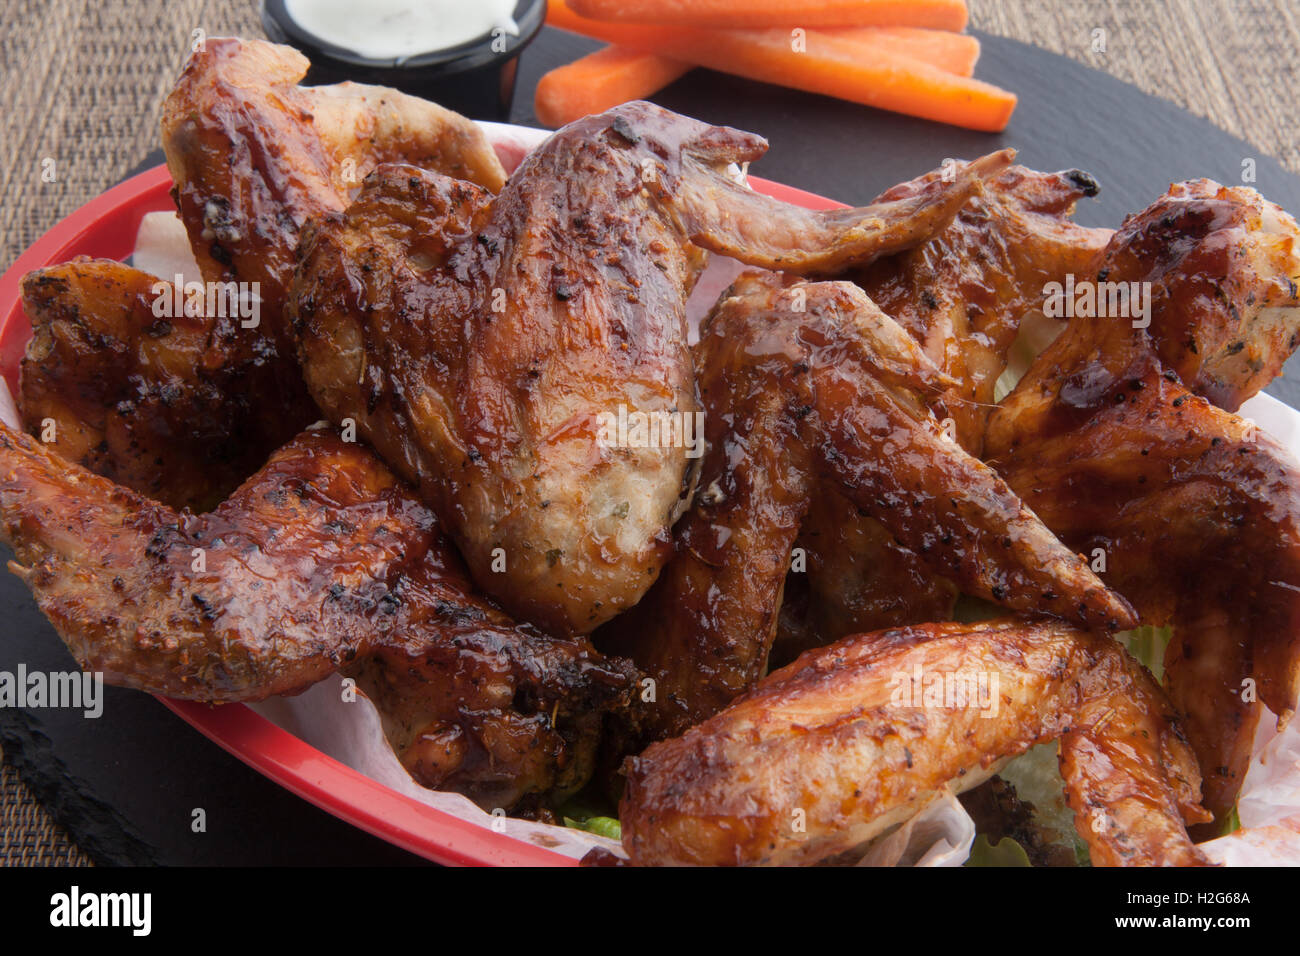 Chicken wings,wings, hot food, finger food,football game food,bbq wings, sports, event,beer, food, dinner, ranch dressing, Stock Photo